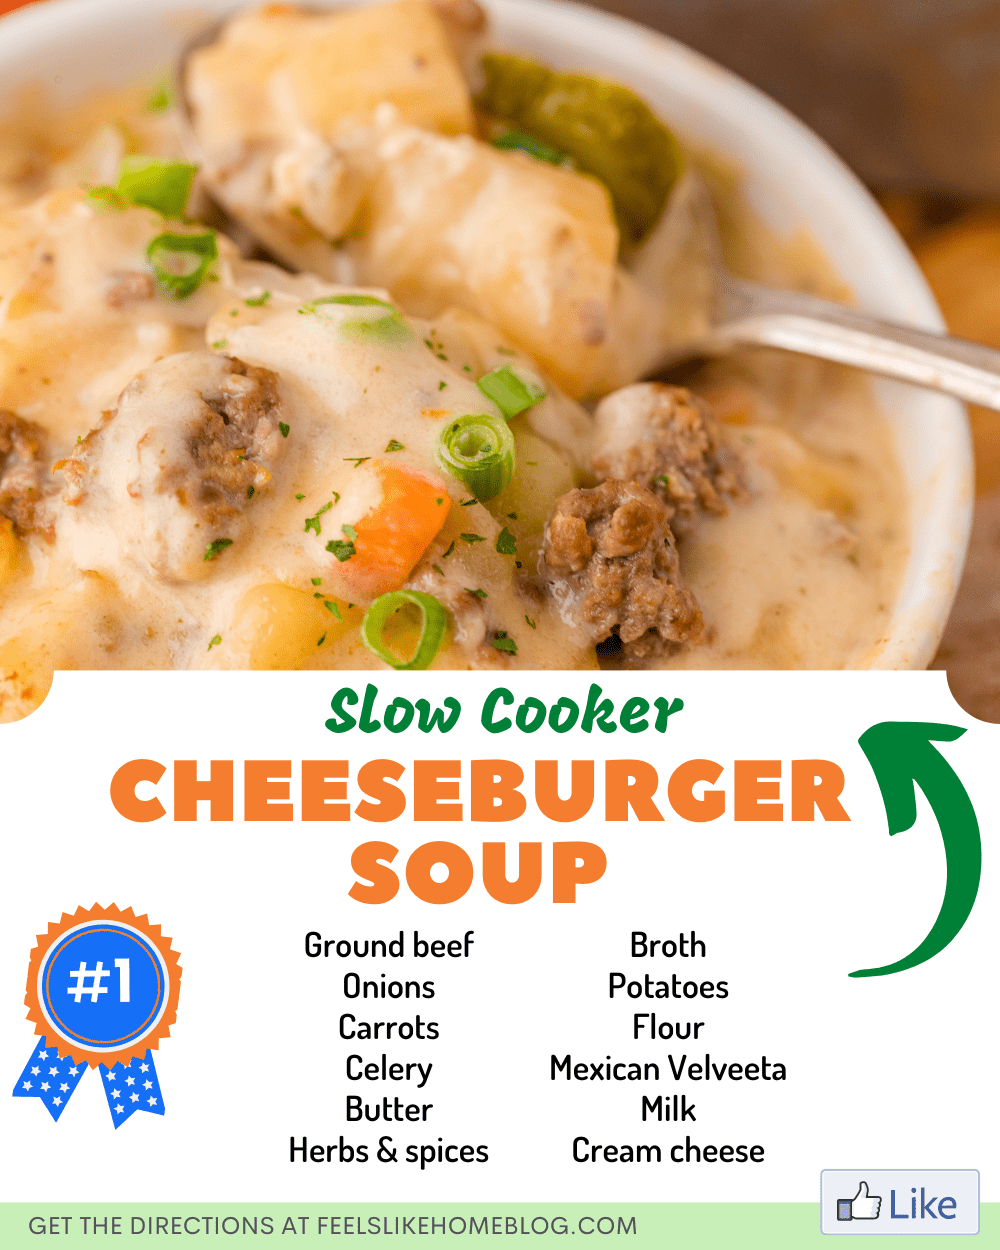 https://feelslikehomeblog.com/wp-content/uploads/2022/07/CROCKPOT-SLOW-COOKER-CHEESEBURGER-SOUP-FROM-TASTE-OF-HOME-FB-long-1.png